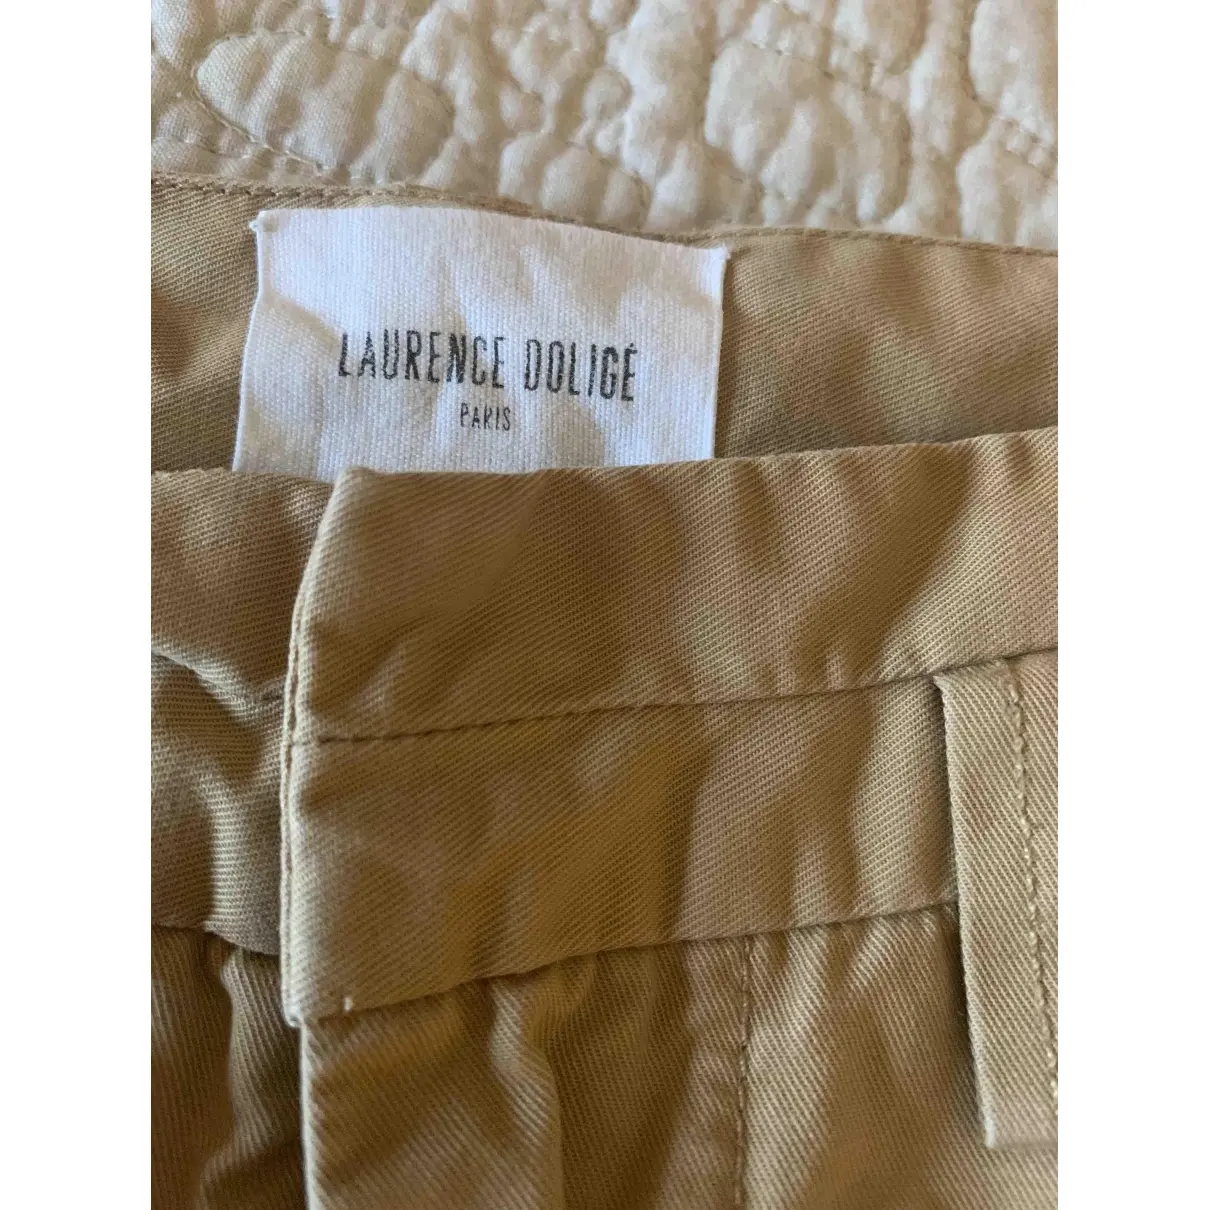 Buy Laurence Dolige Chino pants online